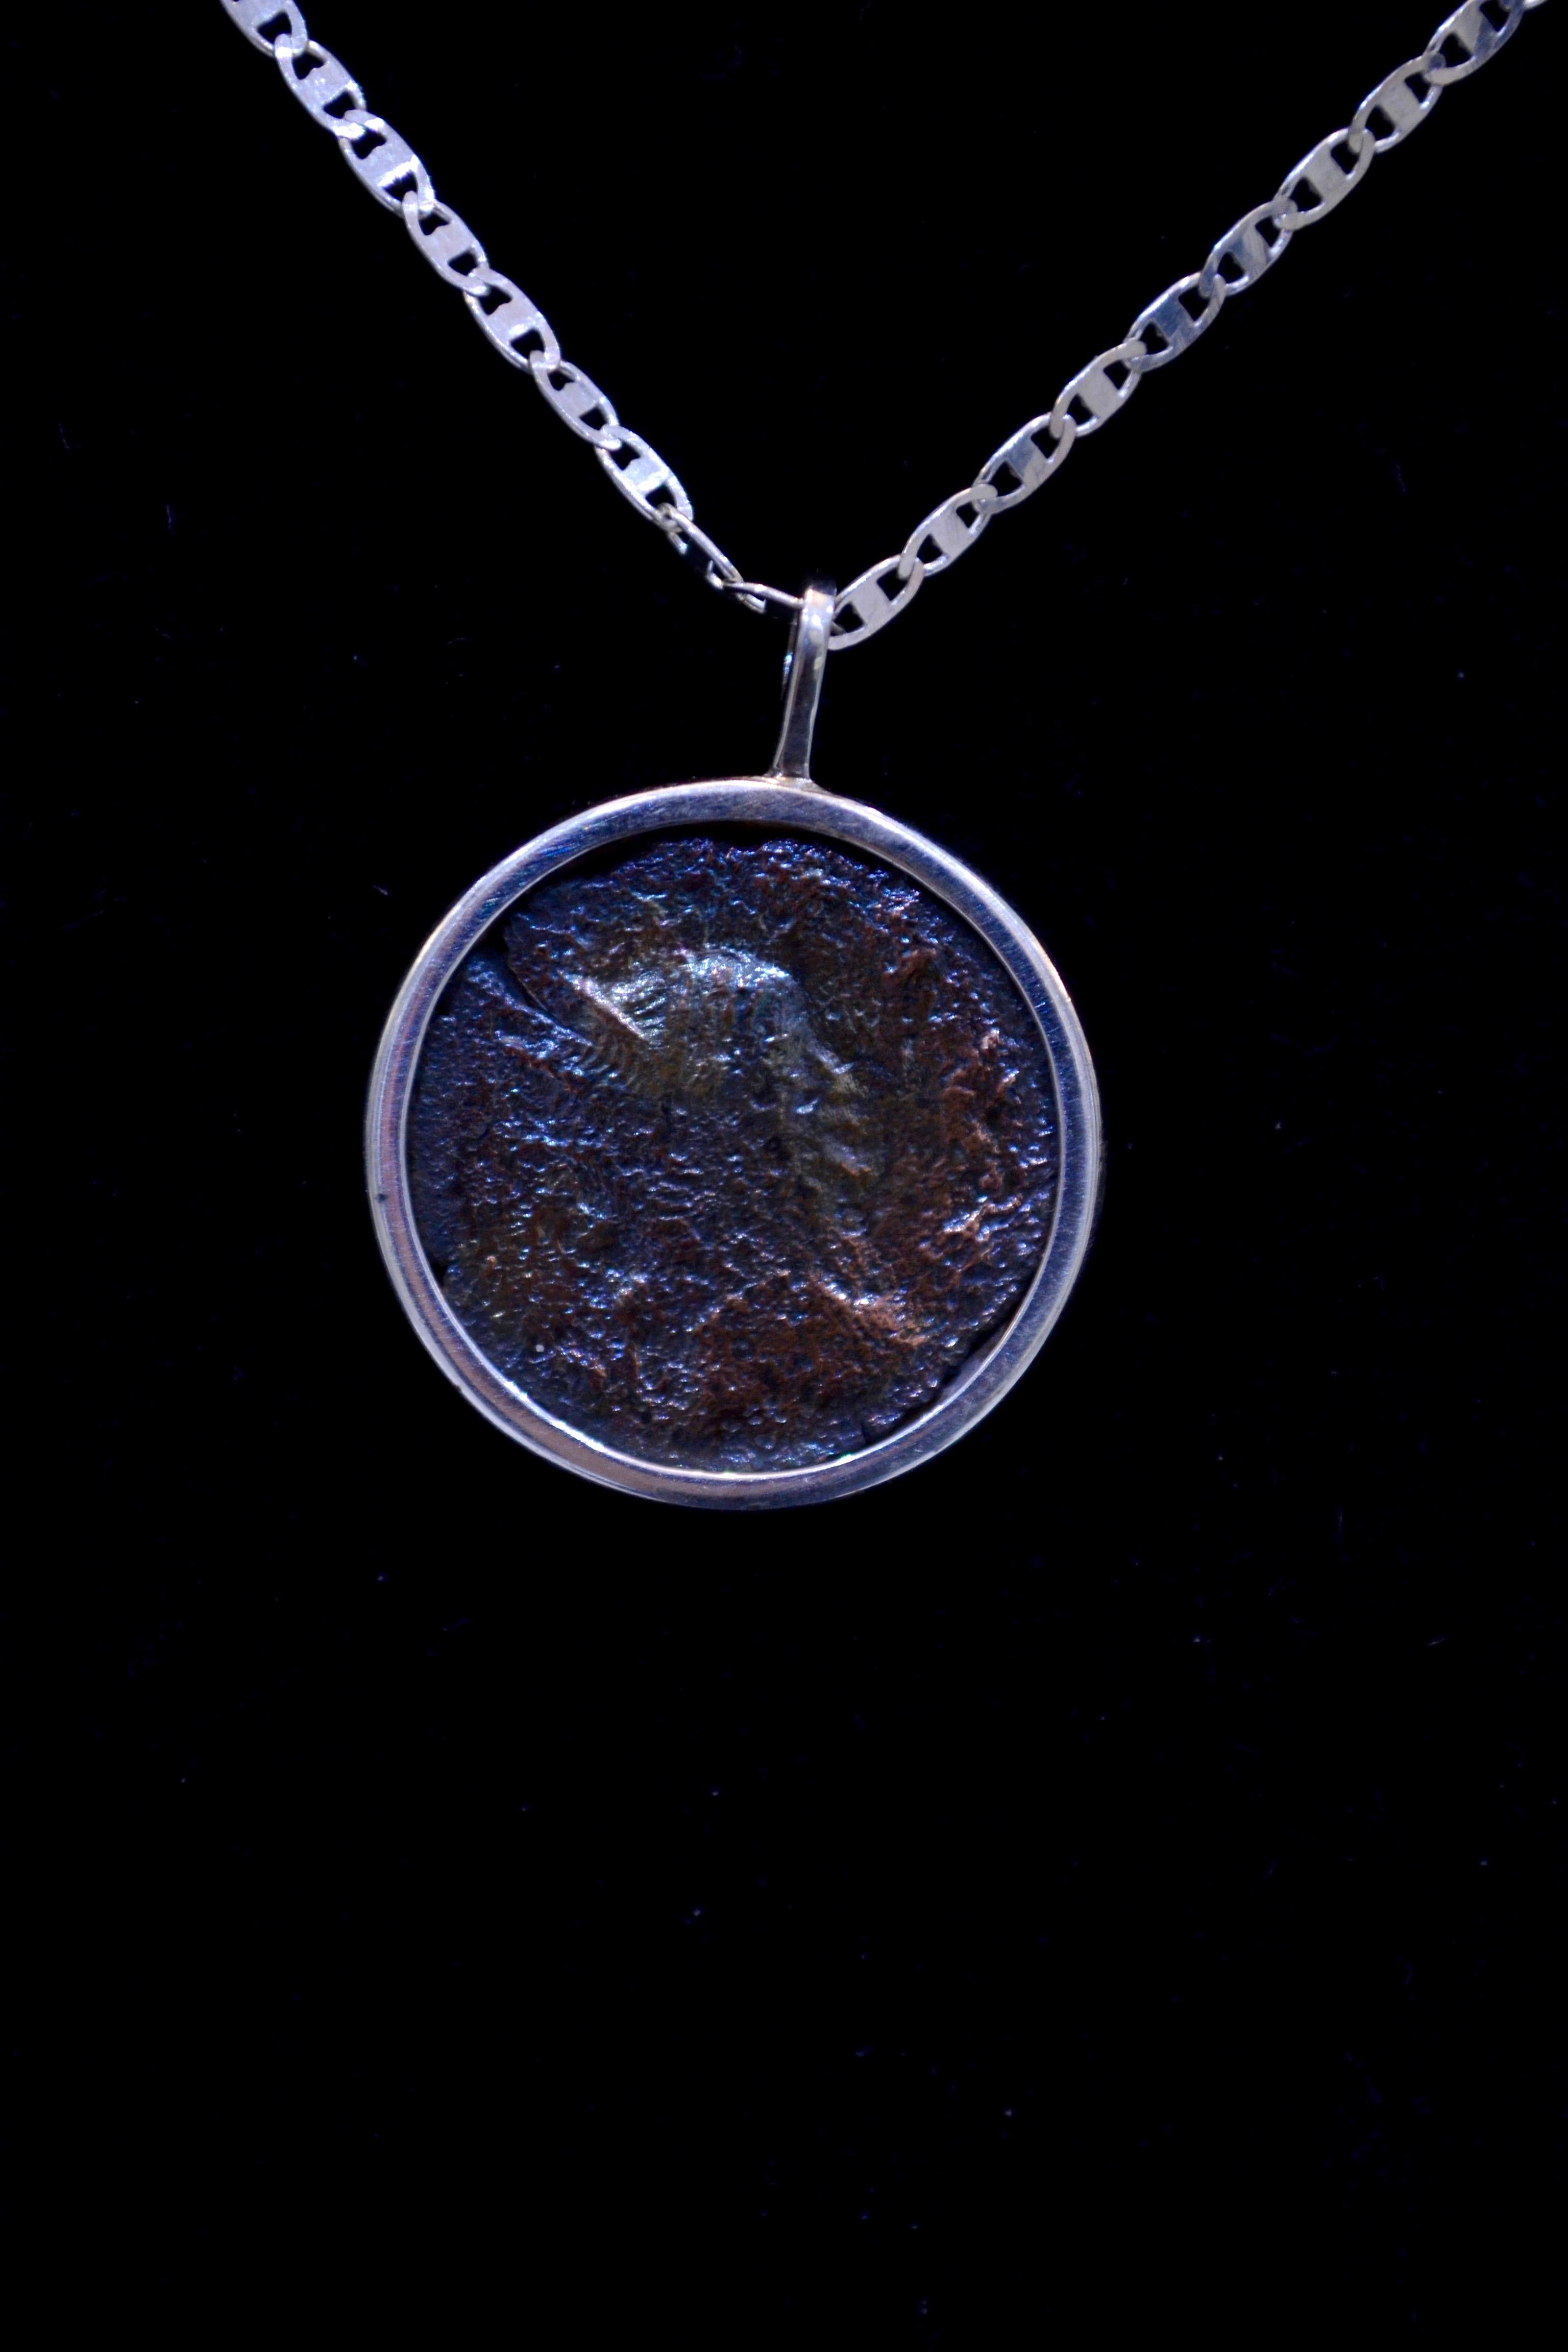 Authentic Roman bronze coin Ca. 27 BC - 476 AD mounted on contemporary silver necklace. Ready to be worn!

Bronze coin from the great Roman Empire that dates back nearly 2,000 years. Beautiful iridescence.